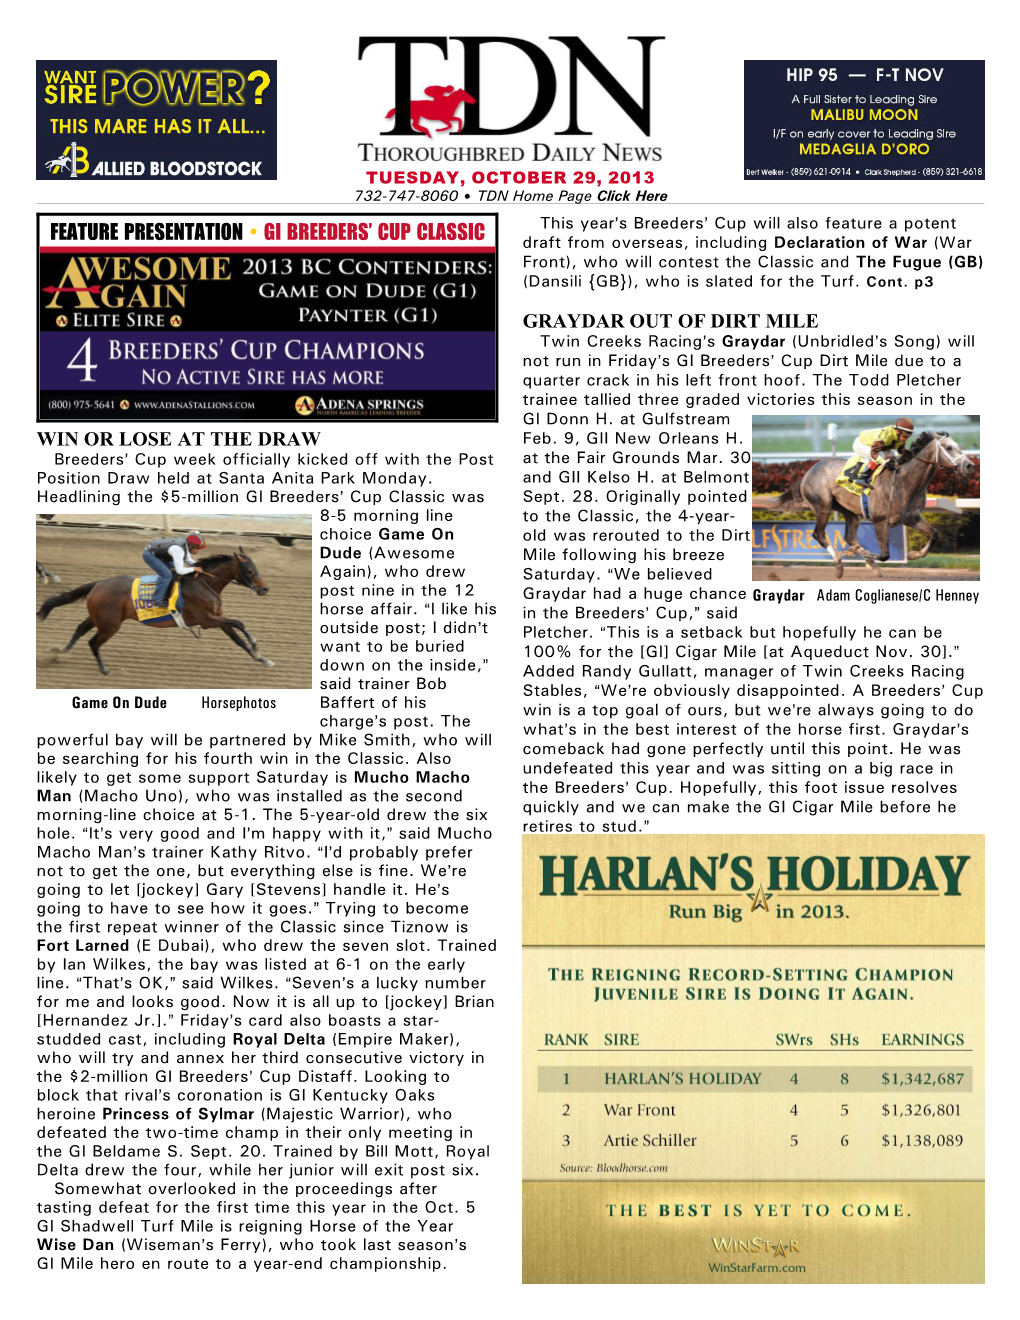 Feature Presentation • Gi Breeders' Cup Classic